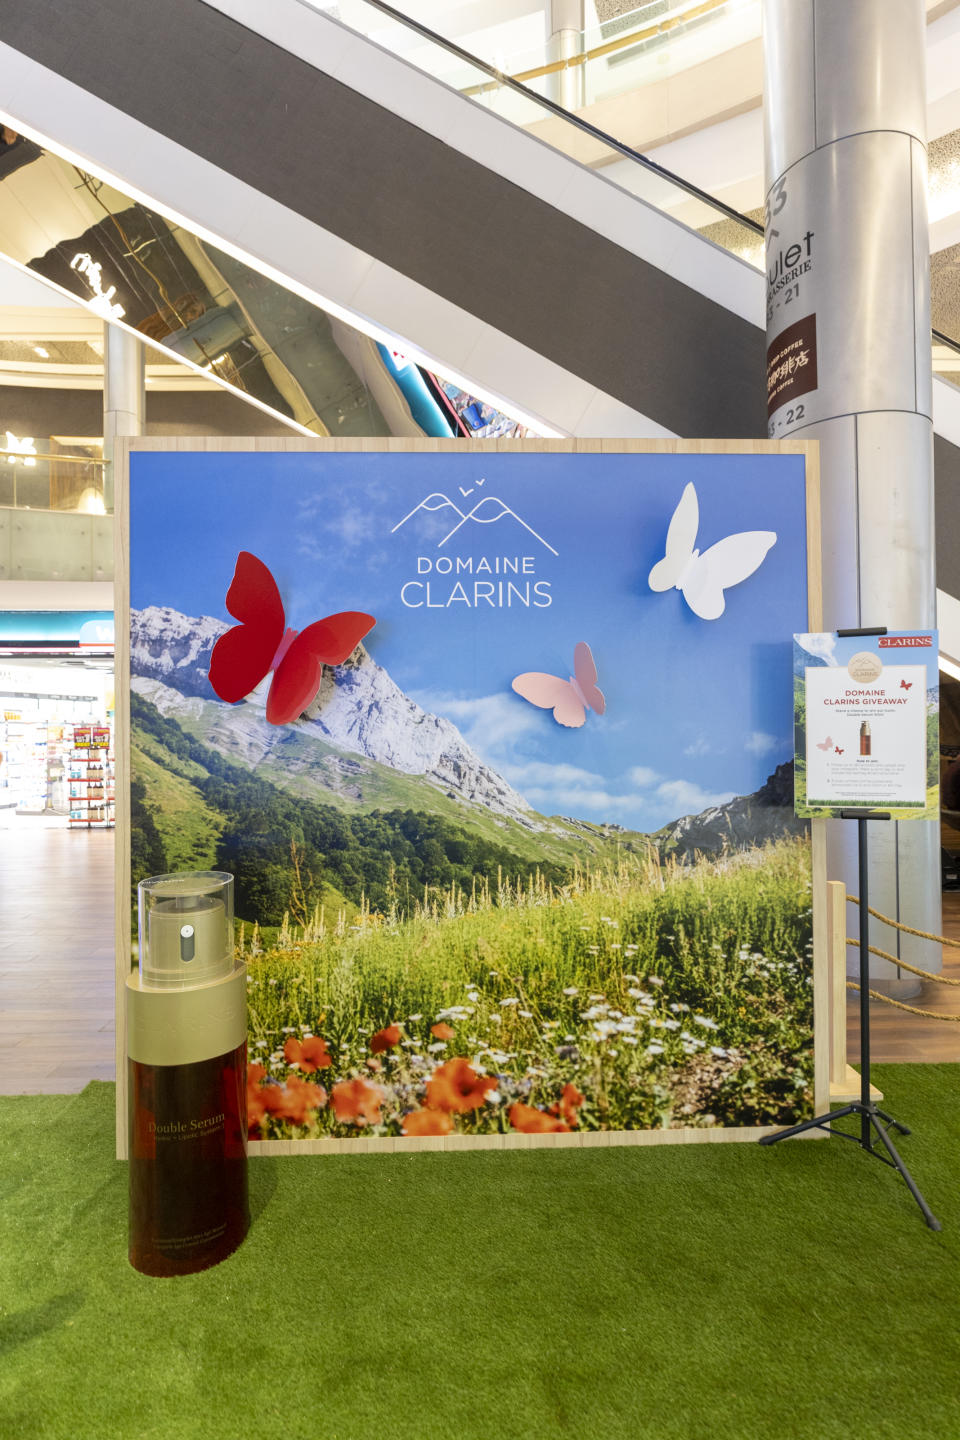 The Clarins Domaine pop-up at ION Orchard ends 7 May. PHOTO: Clarins